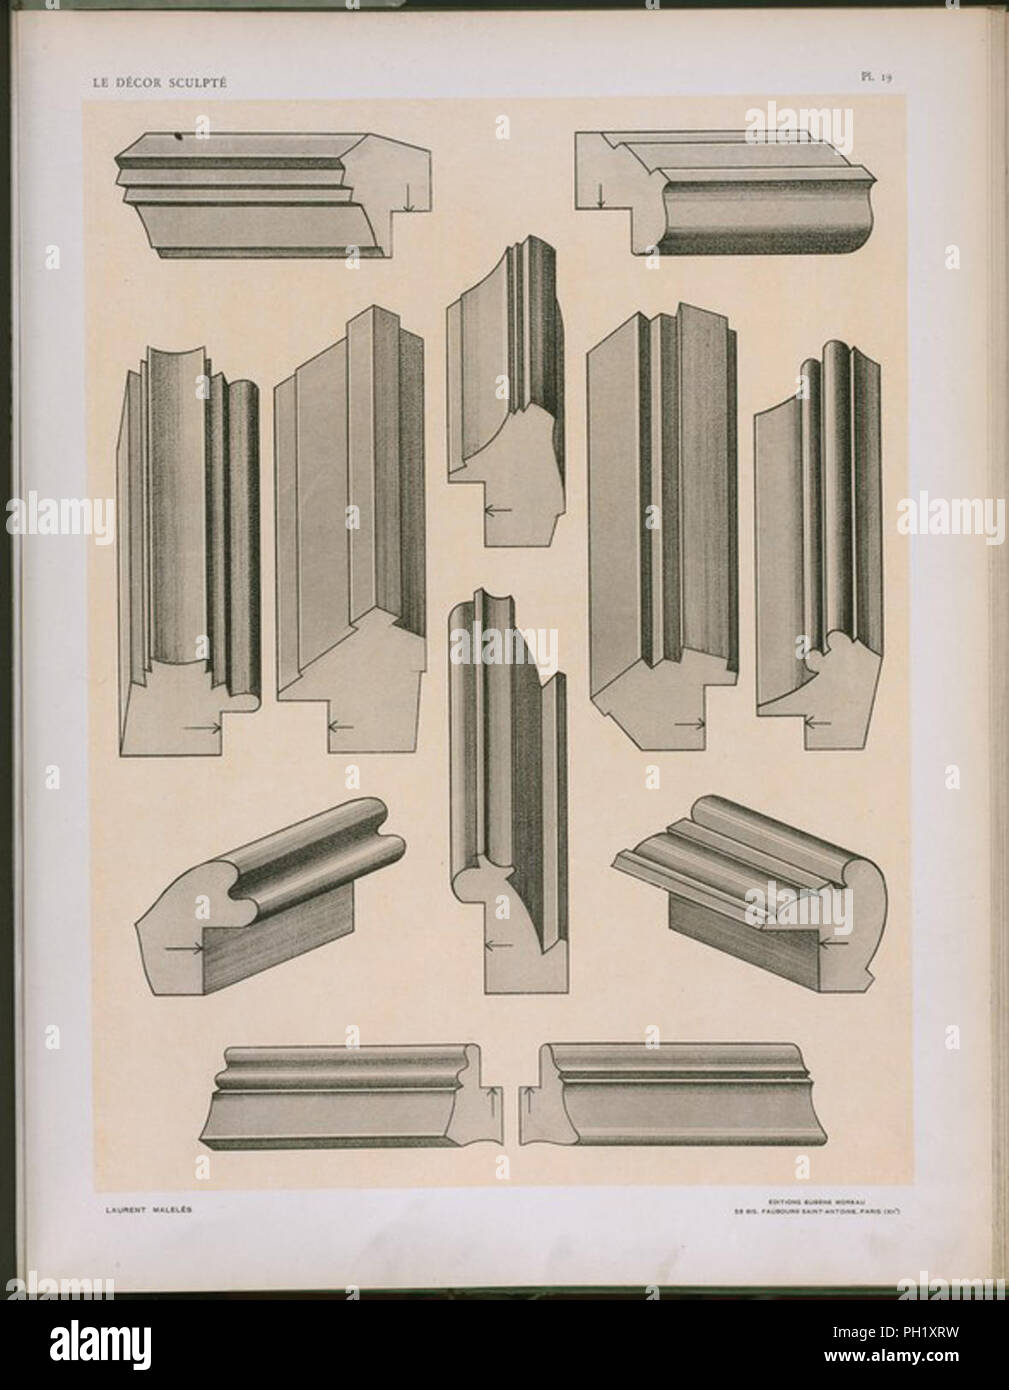 architectural mouldings samples Stock Photo